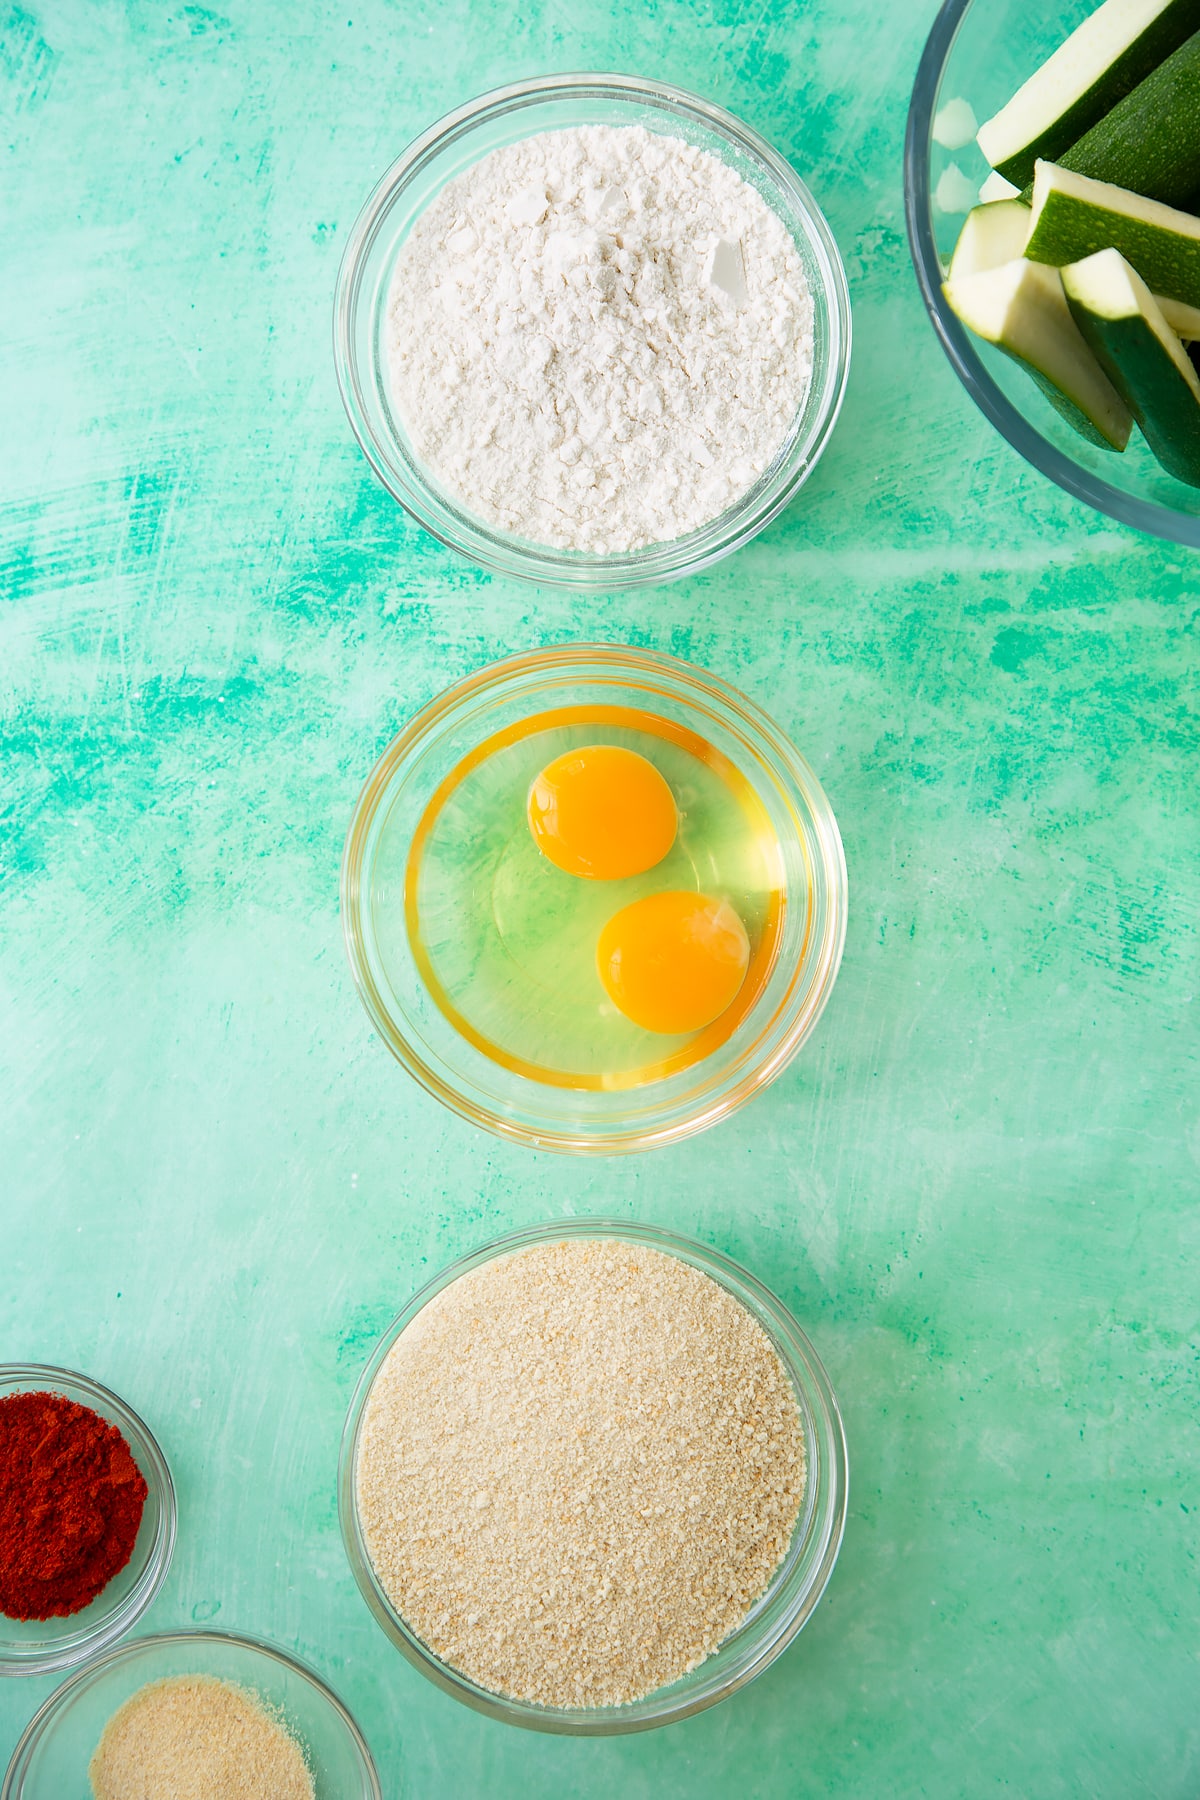 Three mixing bowls, one with flour, one with eggs and one with breadcrumbs